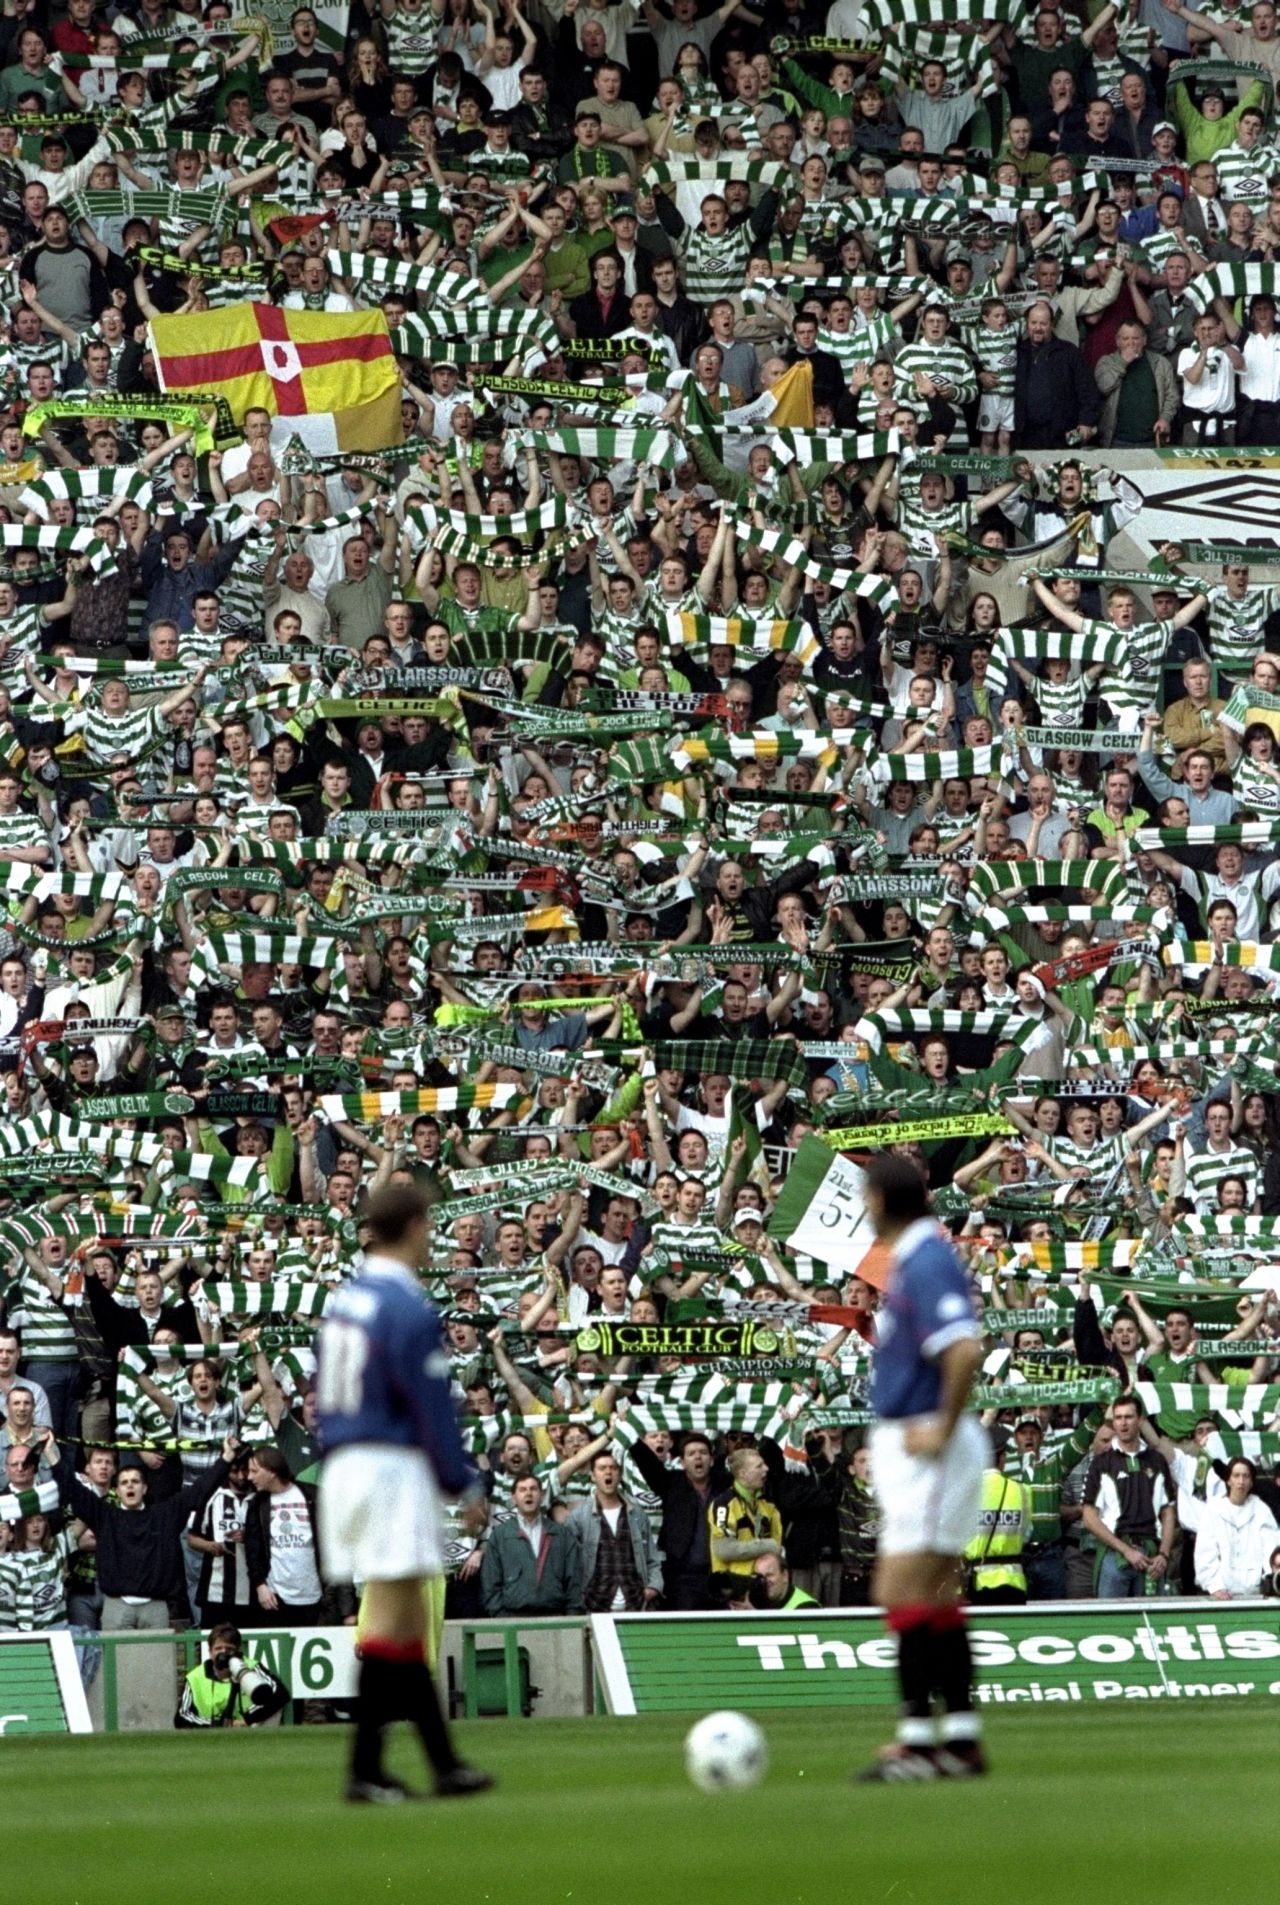 The Scottish league's biggest draw is the "Old Firm" rivalry between Rangers and Glasgow neighbors Celtic. The games are fiercely contested and transcend the usual footballing boundaries given Rangers' Protestant heritage and Celtic's Catholic backing.